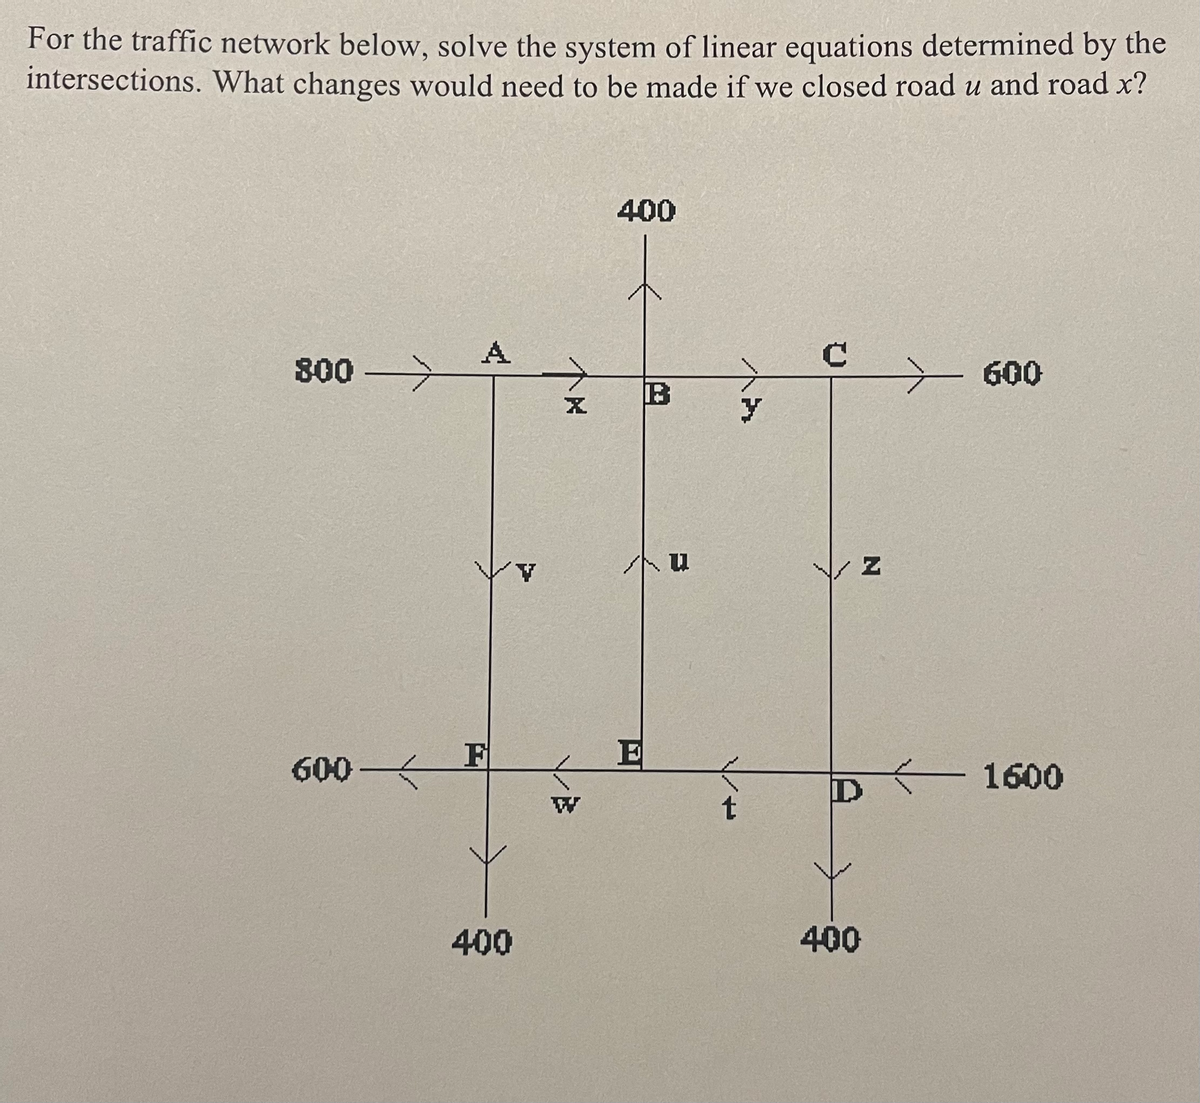 For the traffic network below, solve the system of linear equations determined by the
intersections. What changes would need to be made if we closed road u and road x?
800 →
600-
A
F
400
个
X
400
B
Au
t
y
N
D
400
✈ 600
- 1600